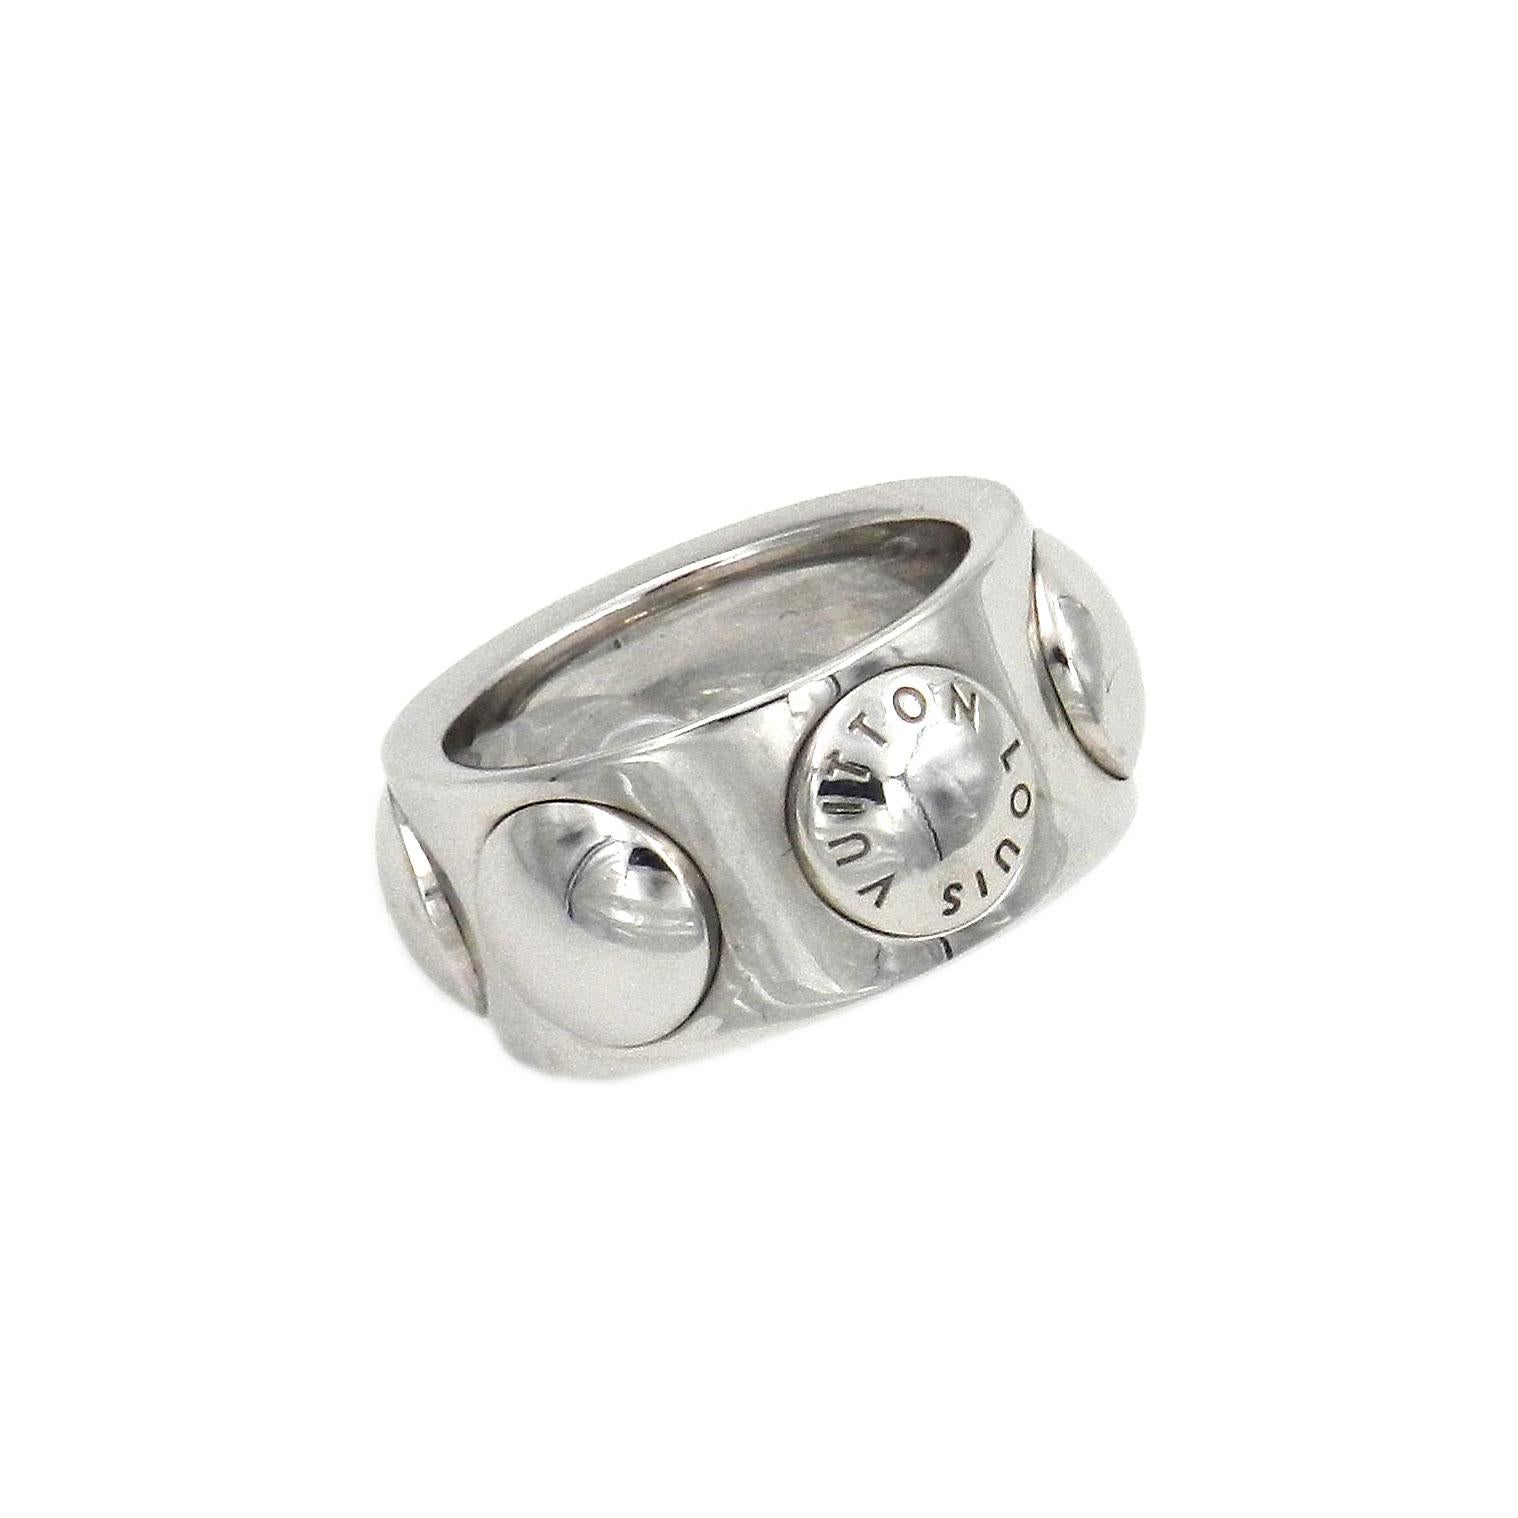 Louis Vuitton Empreinte 18K White Gold Band Ring

This fashionable LOUIS VUITTON white gold ring designed as unisex band ring with embossed suitcase nails prominently featuring a LOUIS VUITTON imprinted hallmark. The timeless, solidly crafted piece